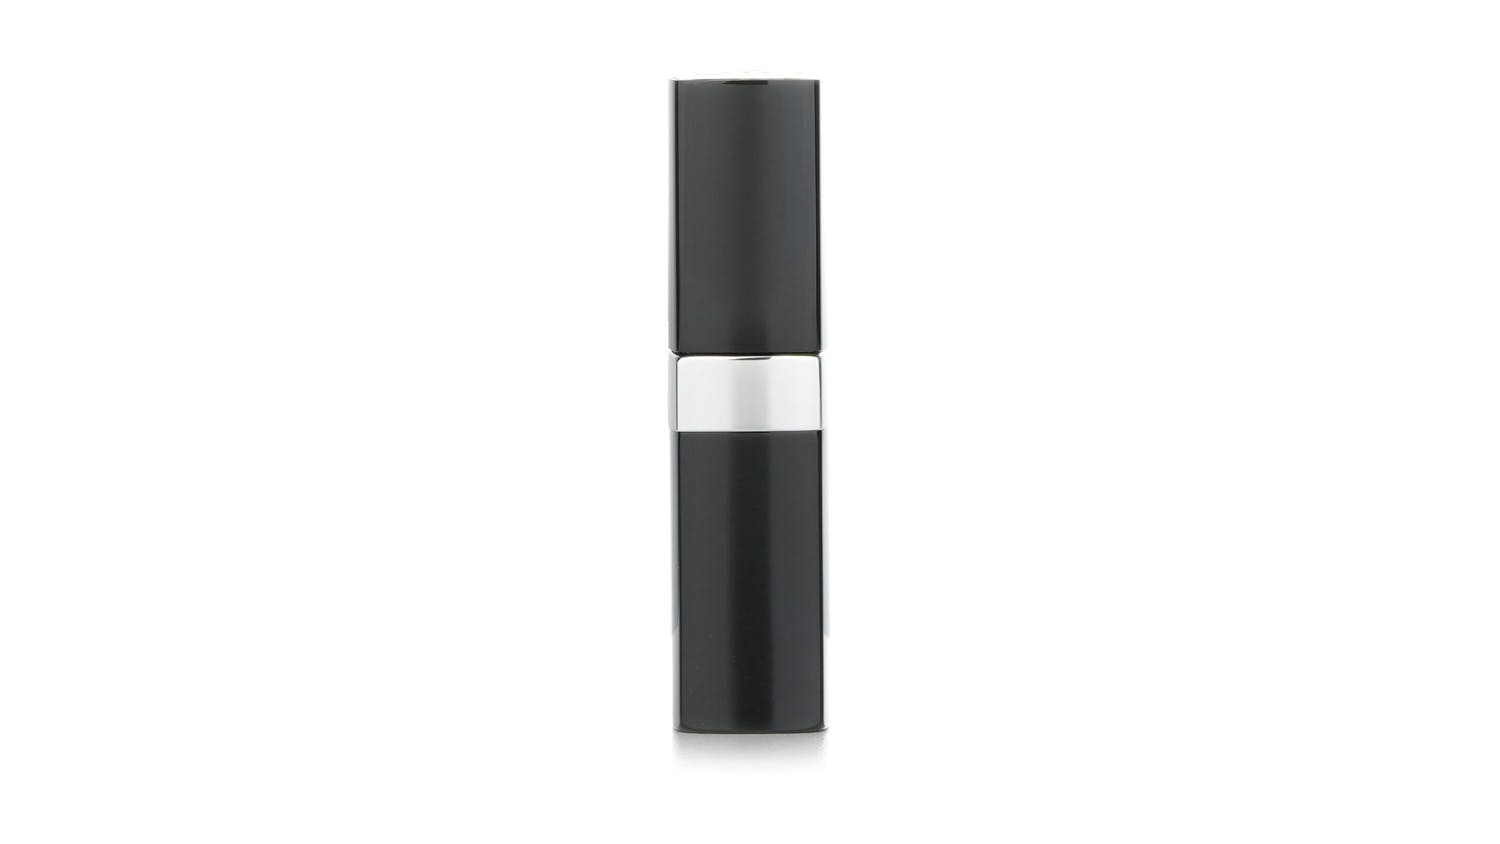 Chanel Rouge Coco Bloom Plumping Lipstick 116 Dream 3g